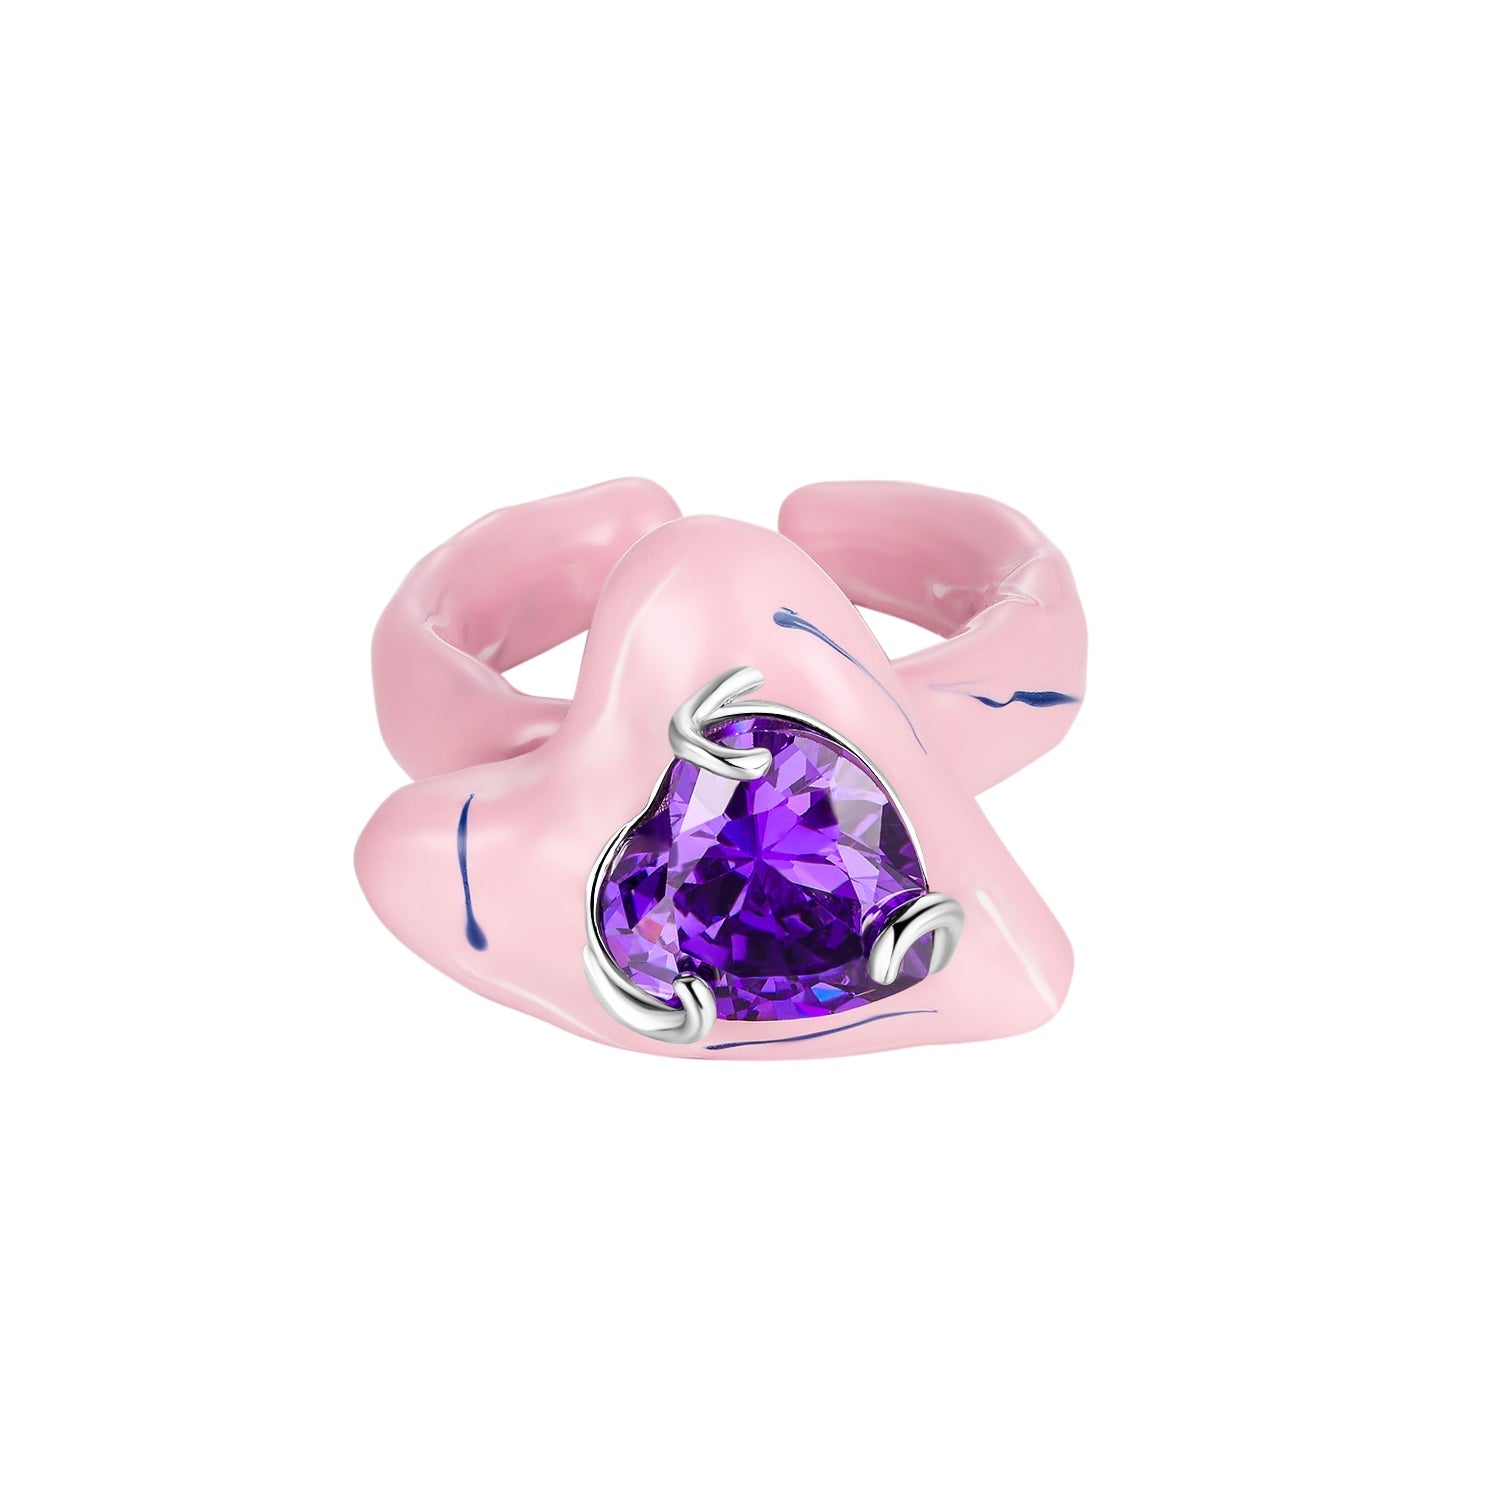 LOST IN ECHO Pink Heart Enamel Ring | MADA IN CHINA